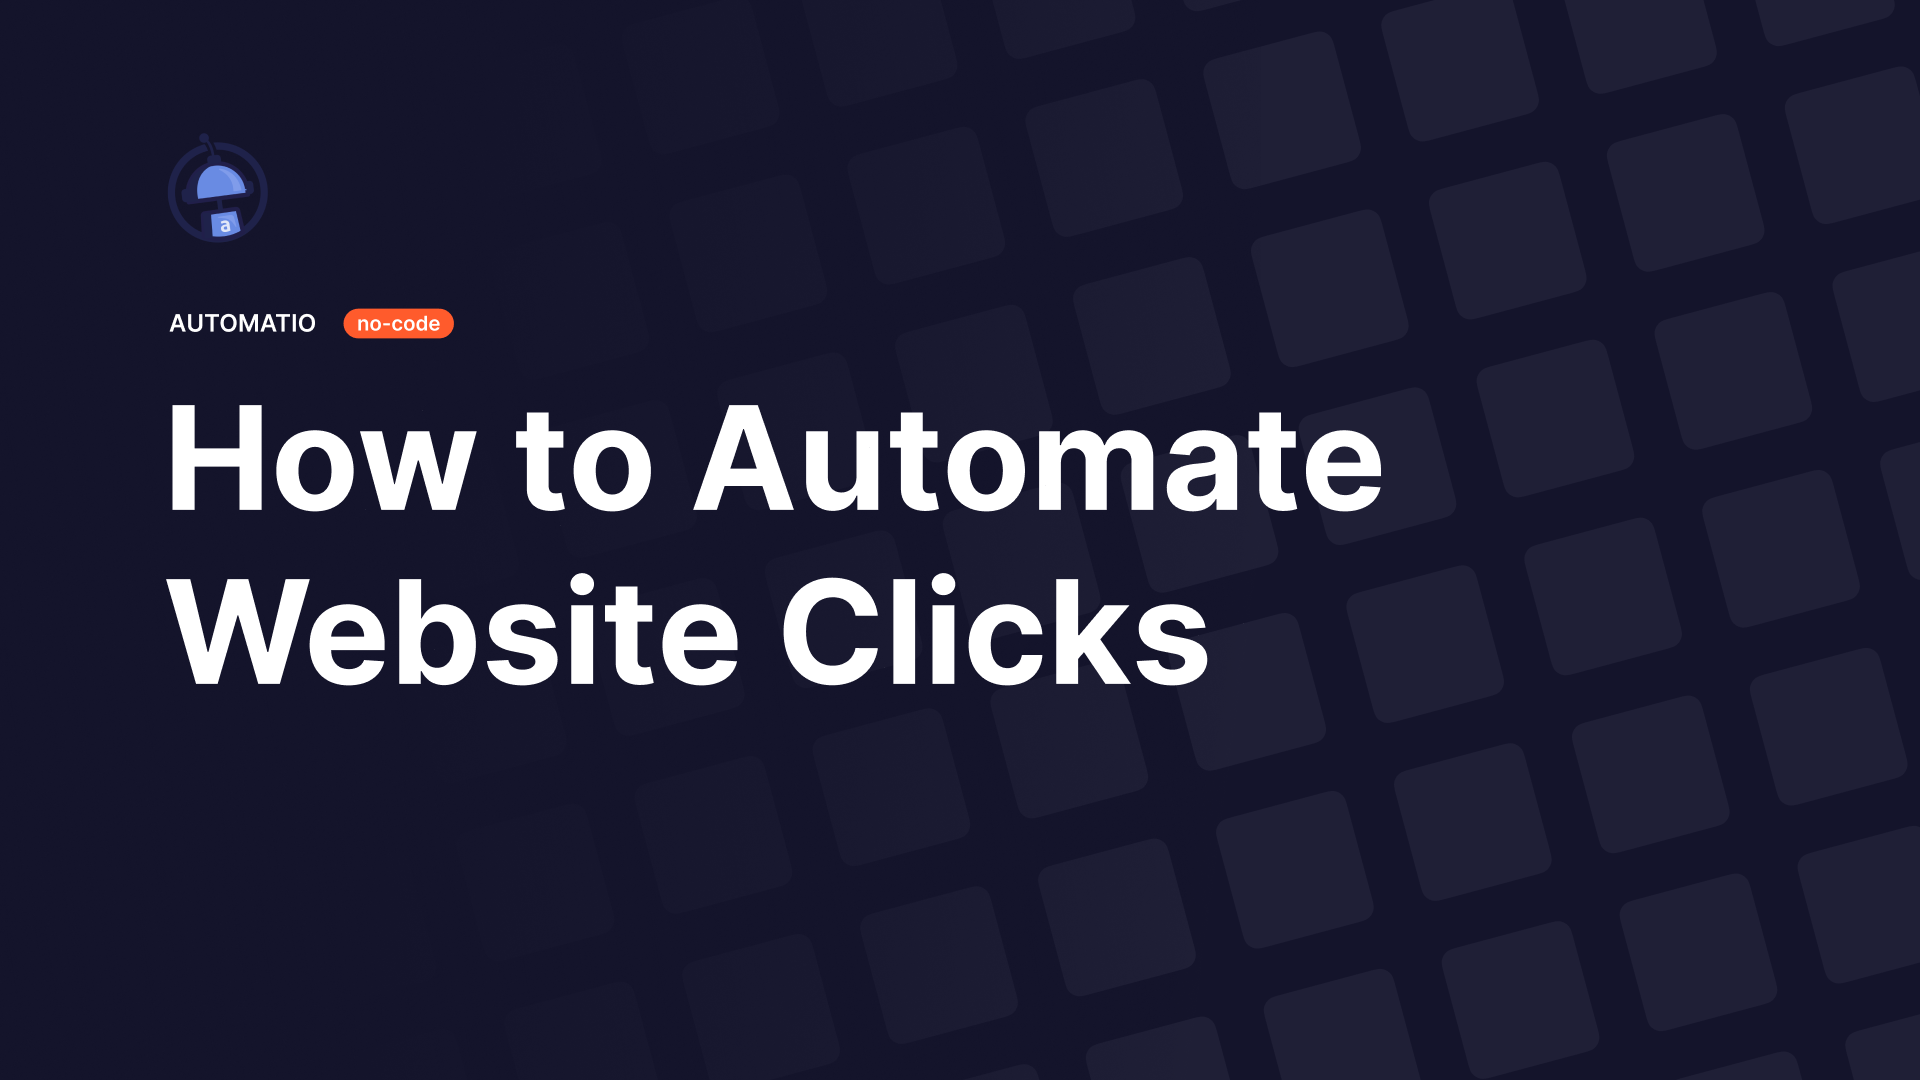 https://automatio.co/blog/content/images/2021/09/How-to-Automate-Website-Clicks.png